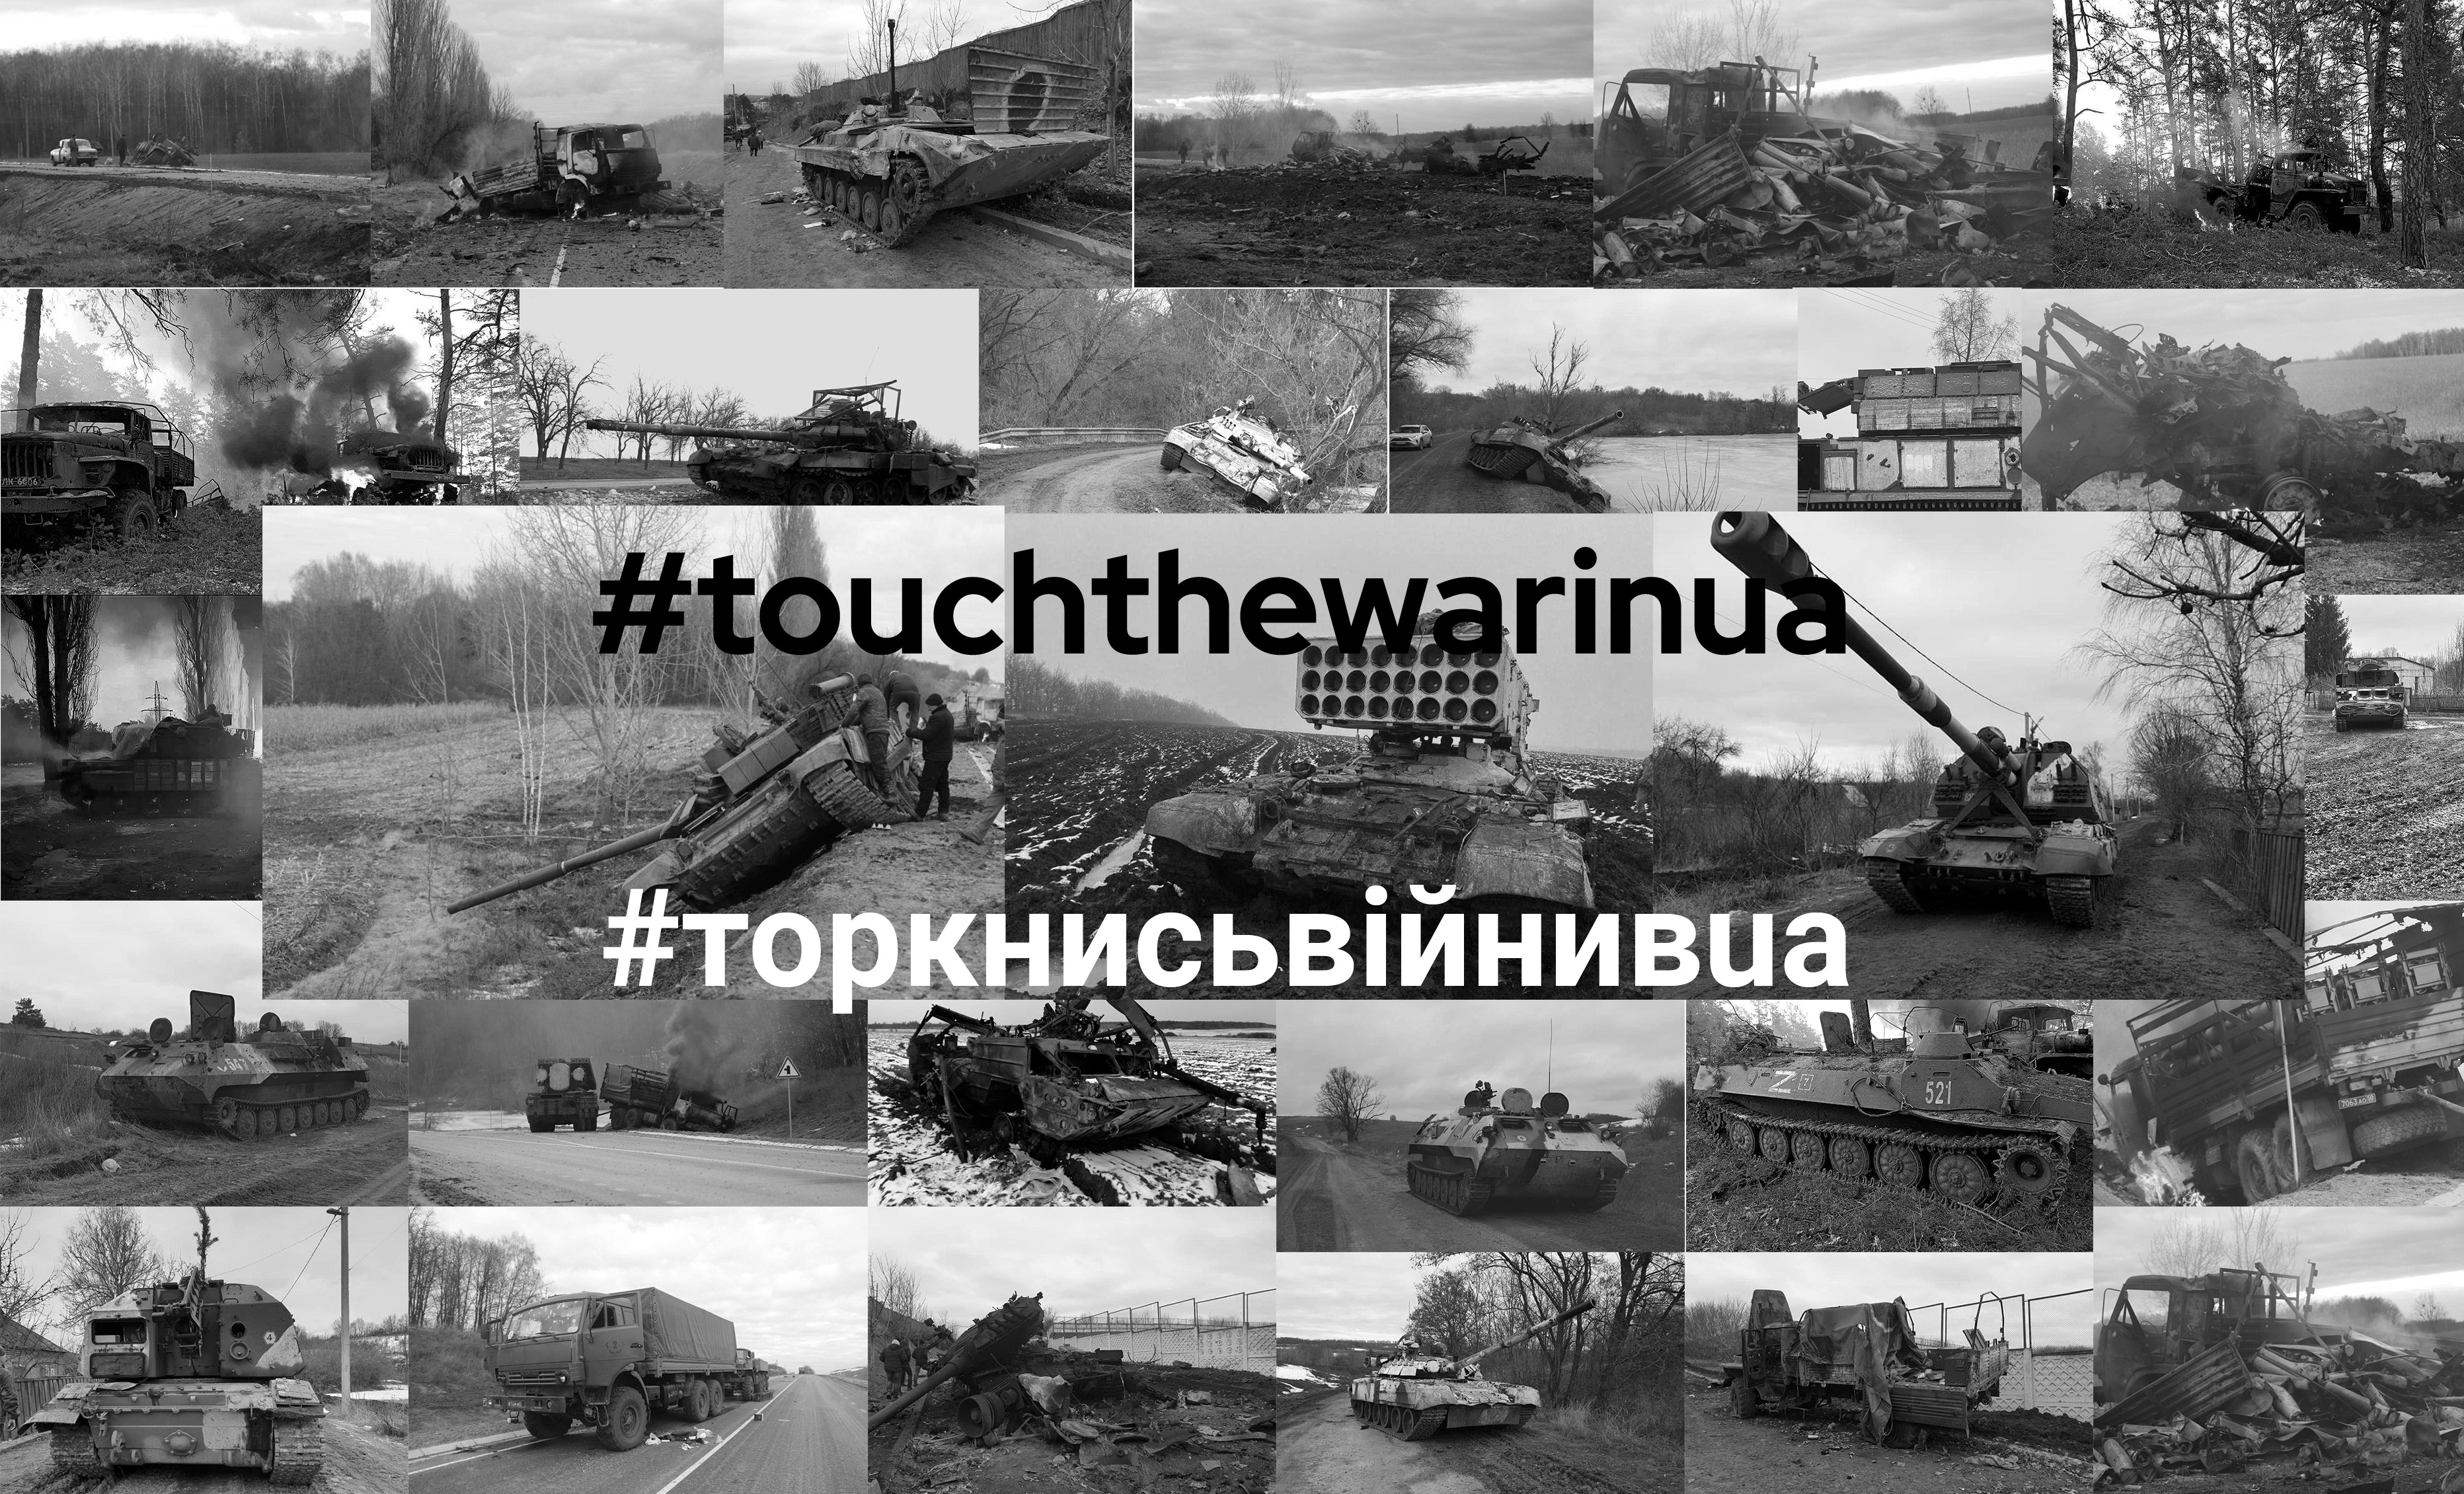 Destoyed russian military units by Brave Ukrainian Army and territory defense